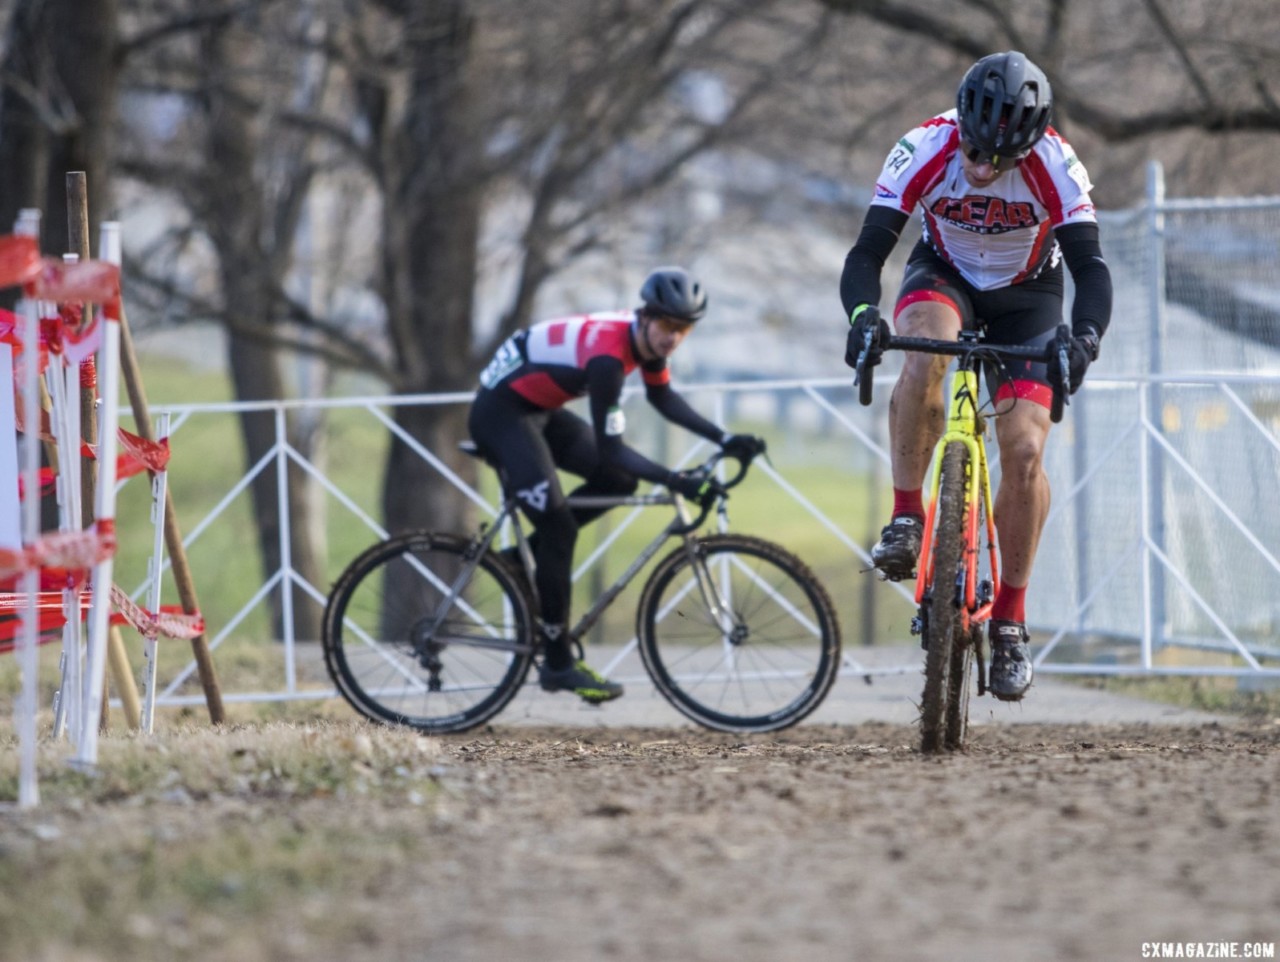 Mullins led Chabanov early in the race. Masters Men 30-34. 2018 Cyclocross National Championships, Louisville, KY. © A. Yee / Cyclocross Magazine